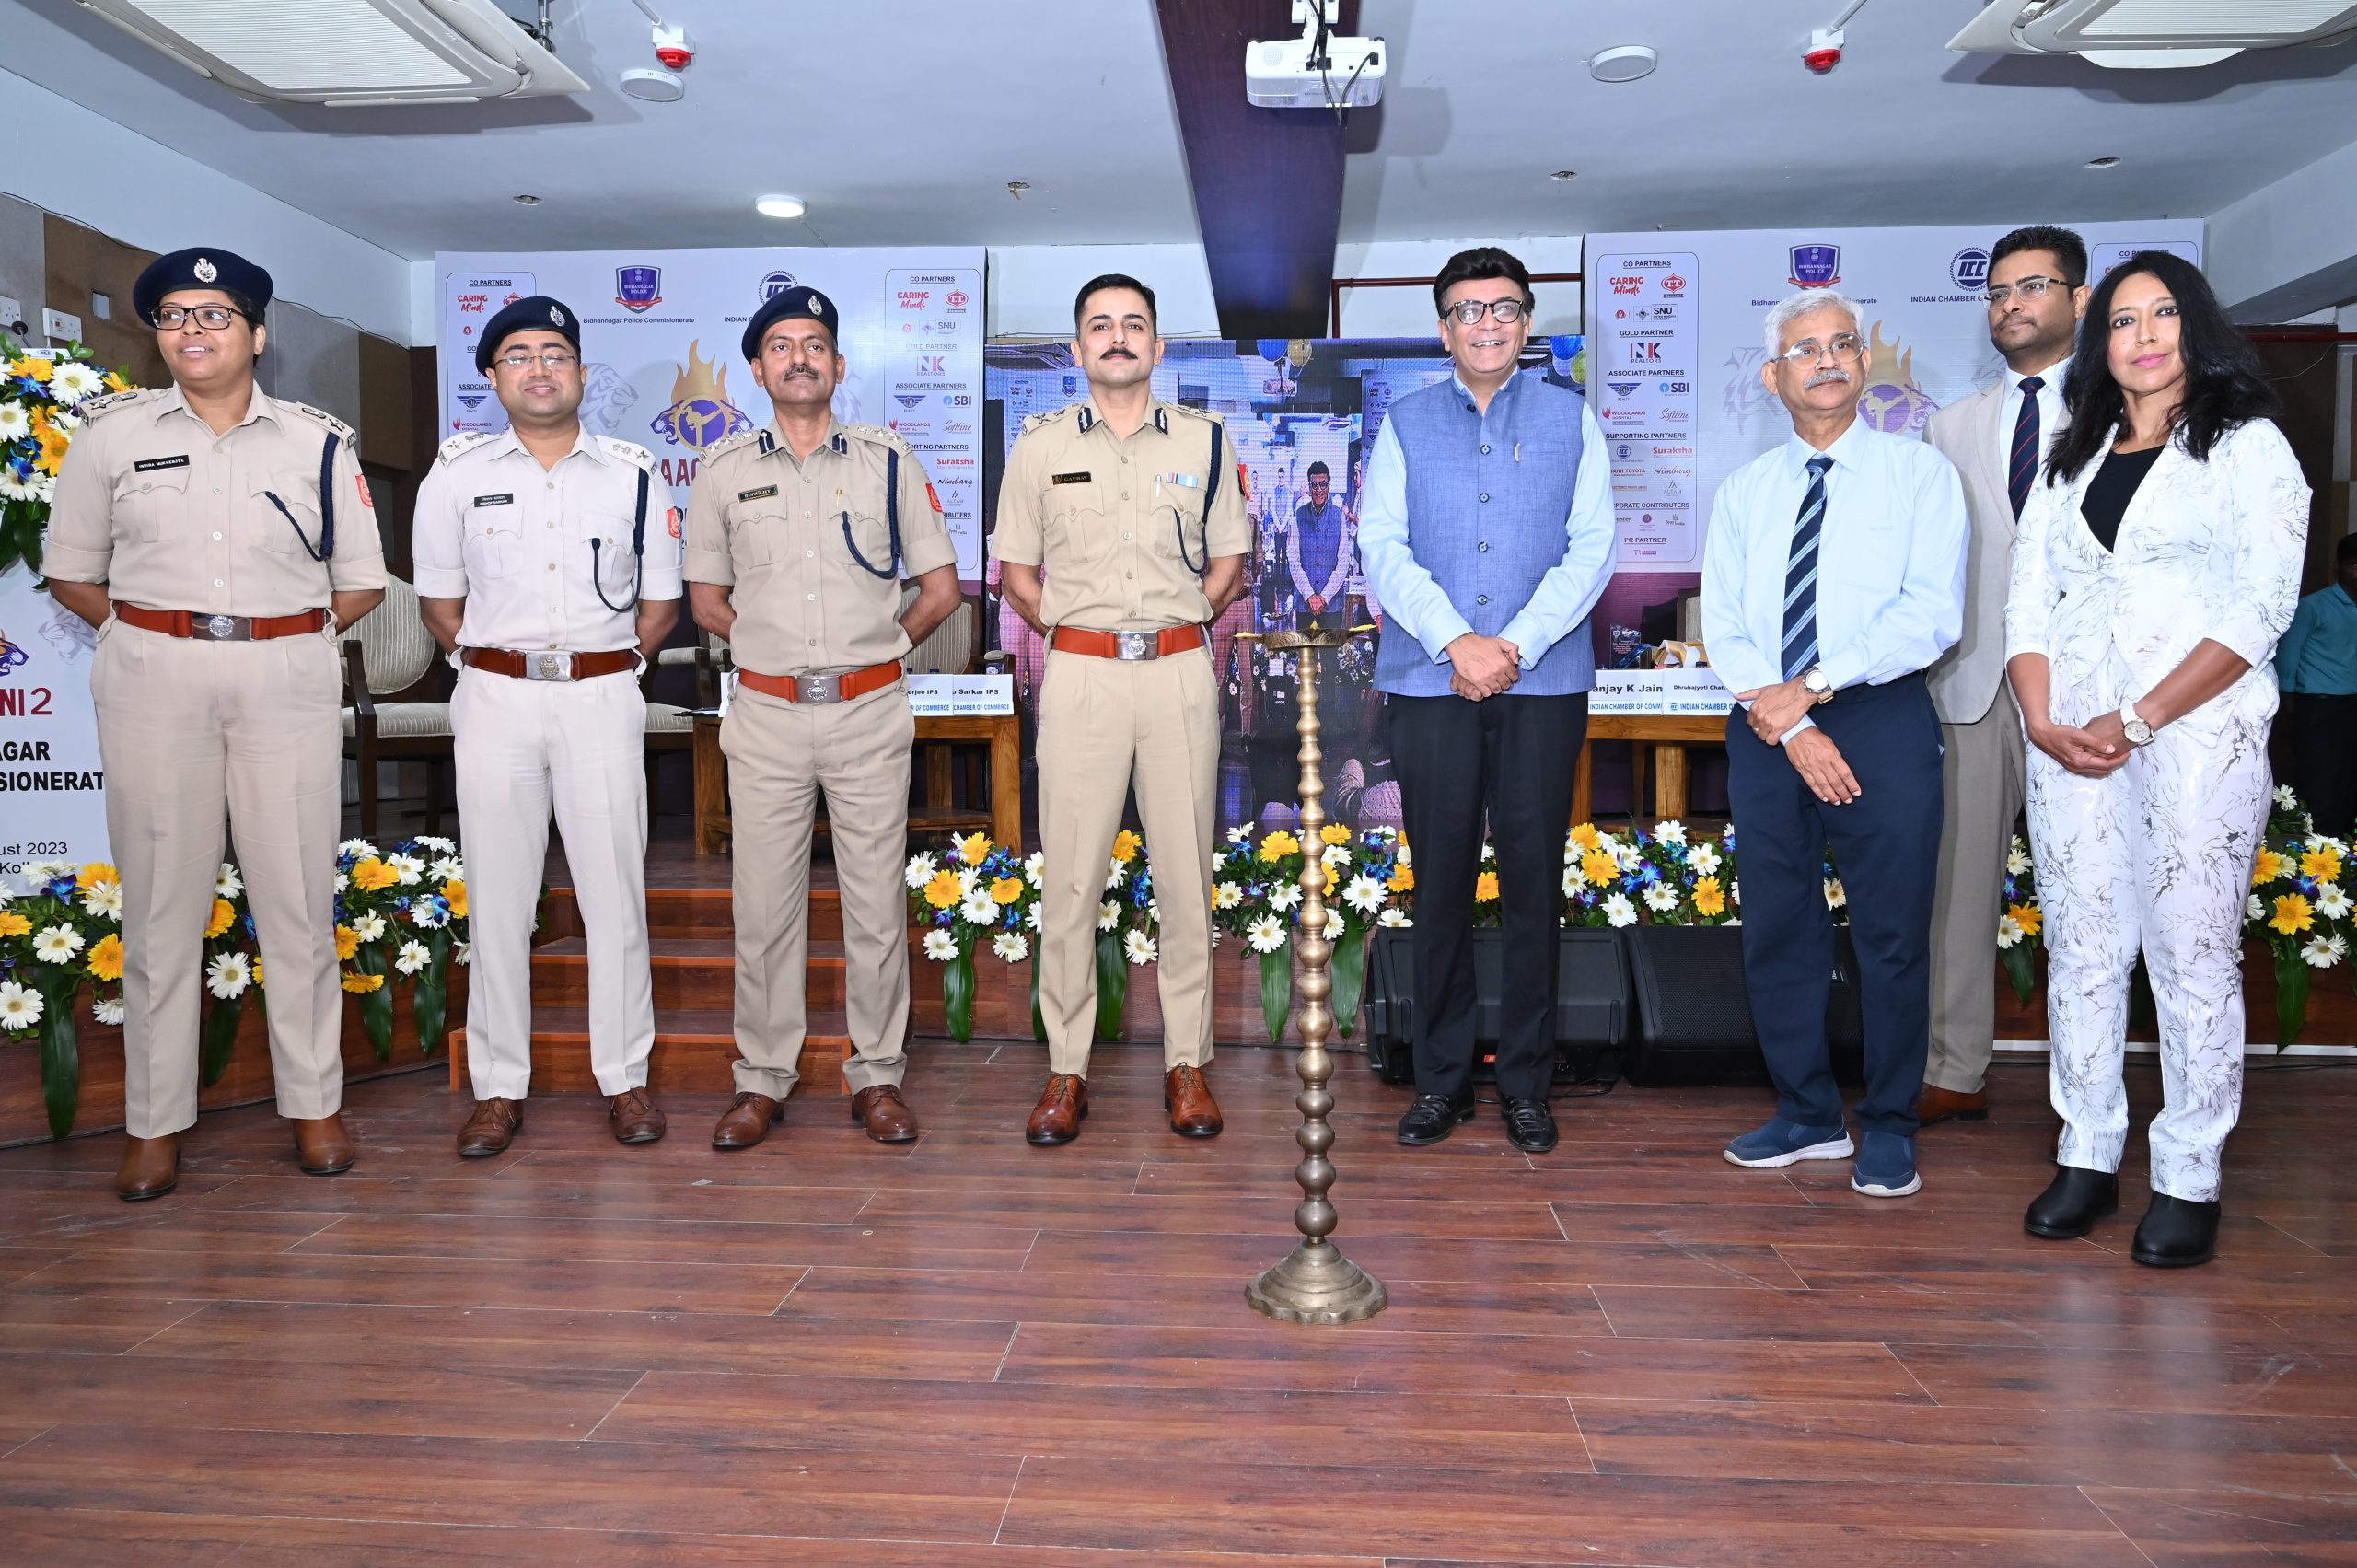 Indian Chamber of Commerce in collaboration with Bidhannagar Police Commissionerate flags the most appreciated women empowerment initiative 'Baaghini 2.' Mr. Gaurav Sharma, IPS, Hon'ble Commissioner of Police, Ms. Charu Sharma, IPS, Additional Deputy Commissioner of Police Detective Department, Bidhannagar Police Commissionerate, Ms. Debarati Mukhopadhyay, Author, Mr. Sanjay K Jain, Chairman, ICC National Committee on Textiles and MD, TT Limited and Prof. Dhrubajyoti Chattopadhyay, Vice Chancellor, Sister Nivedita University were present in the event.